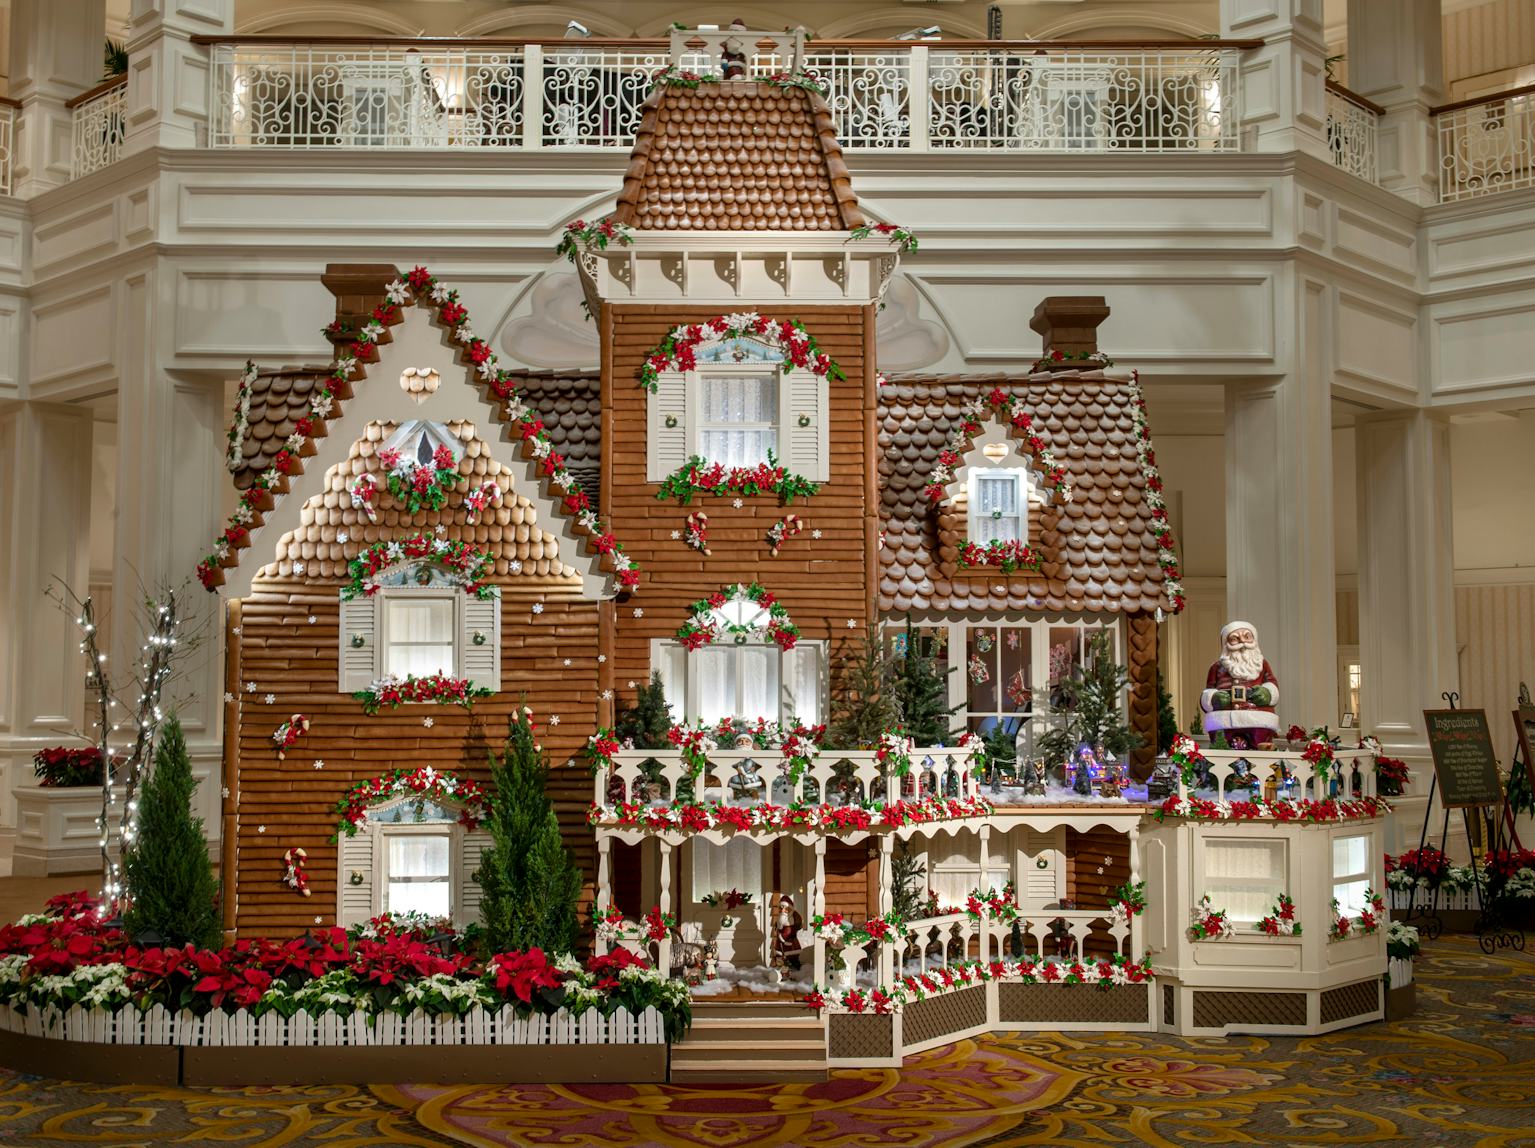 Disney's Grand Floridian Gingerbread House Is A 14FootTall Holiday